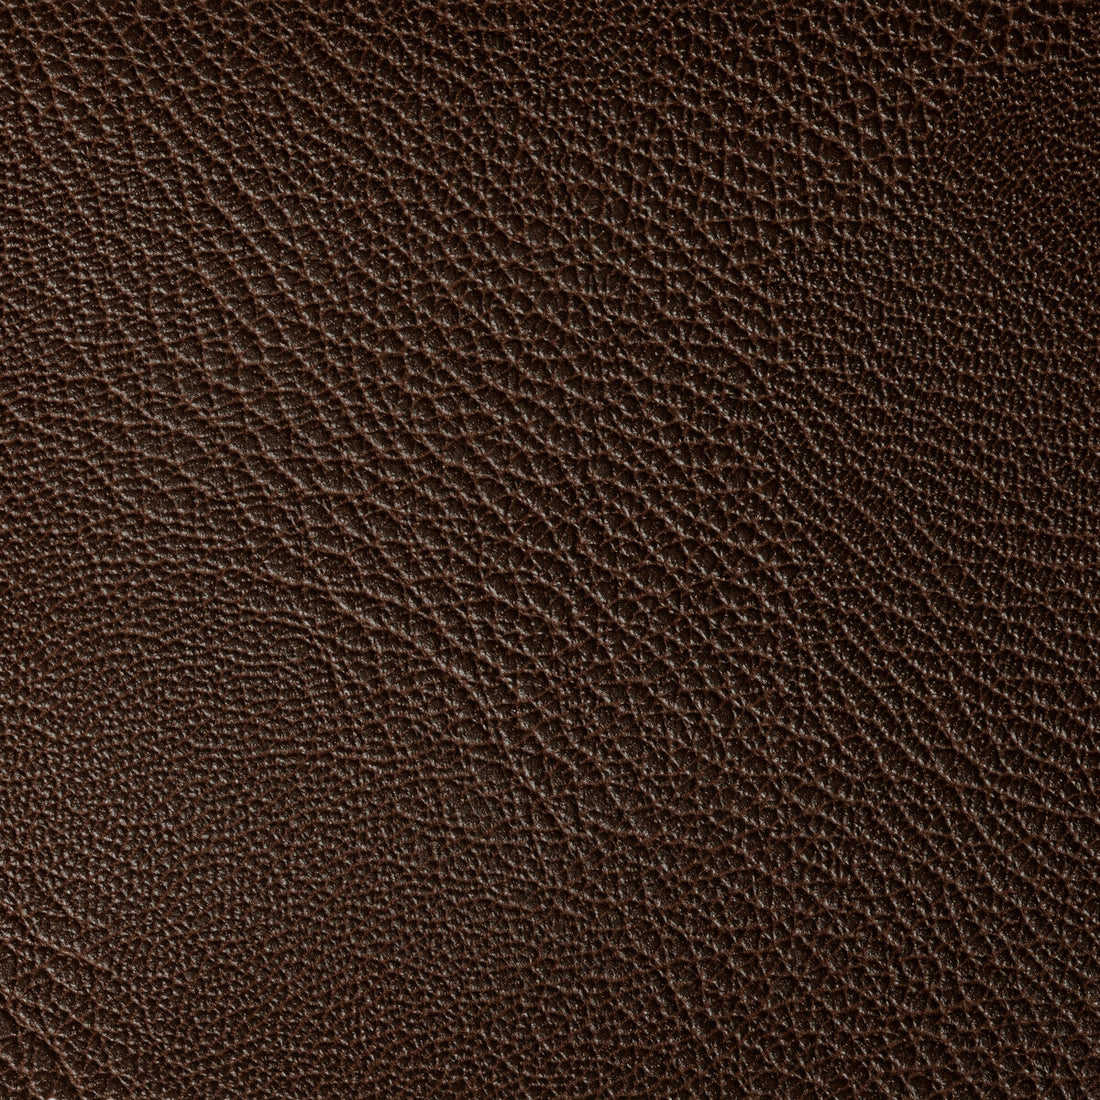 Rustler fabric in bark color - pattern RUSTLER.6.0 - by Kravet Contract in the Foundations / Value collection